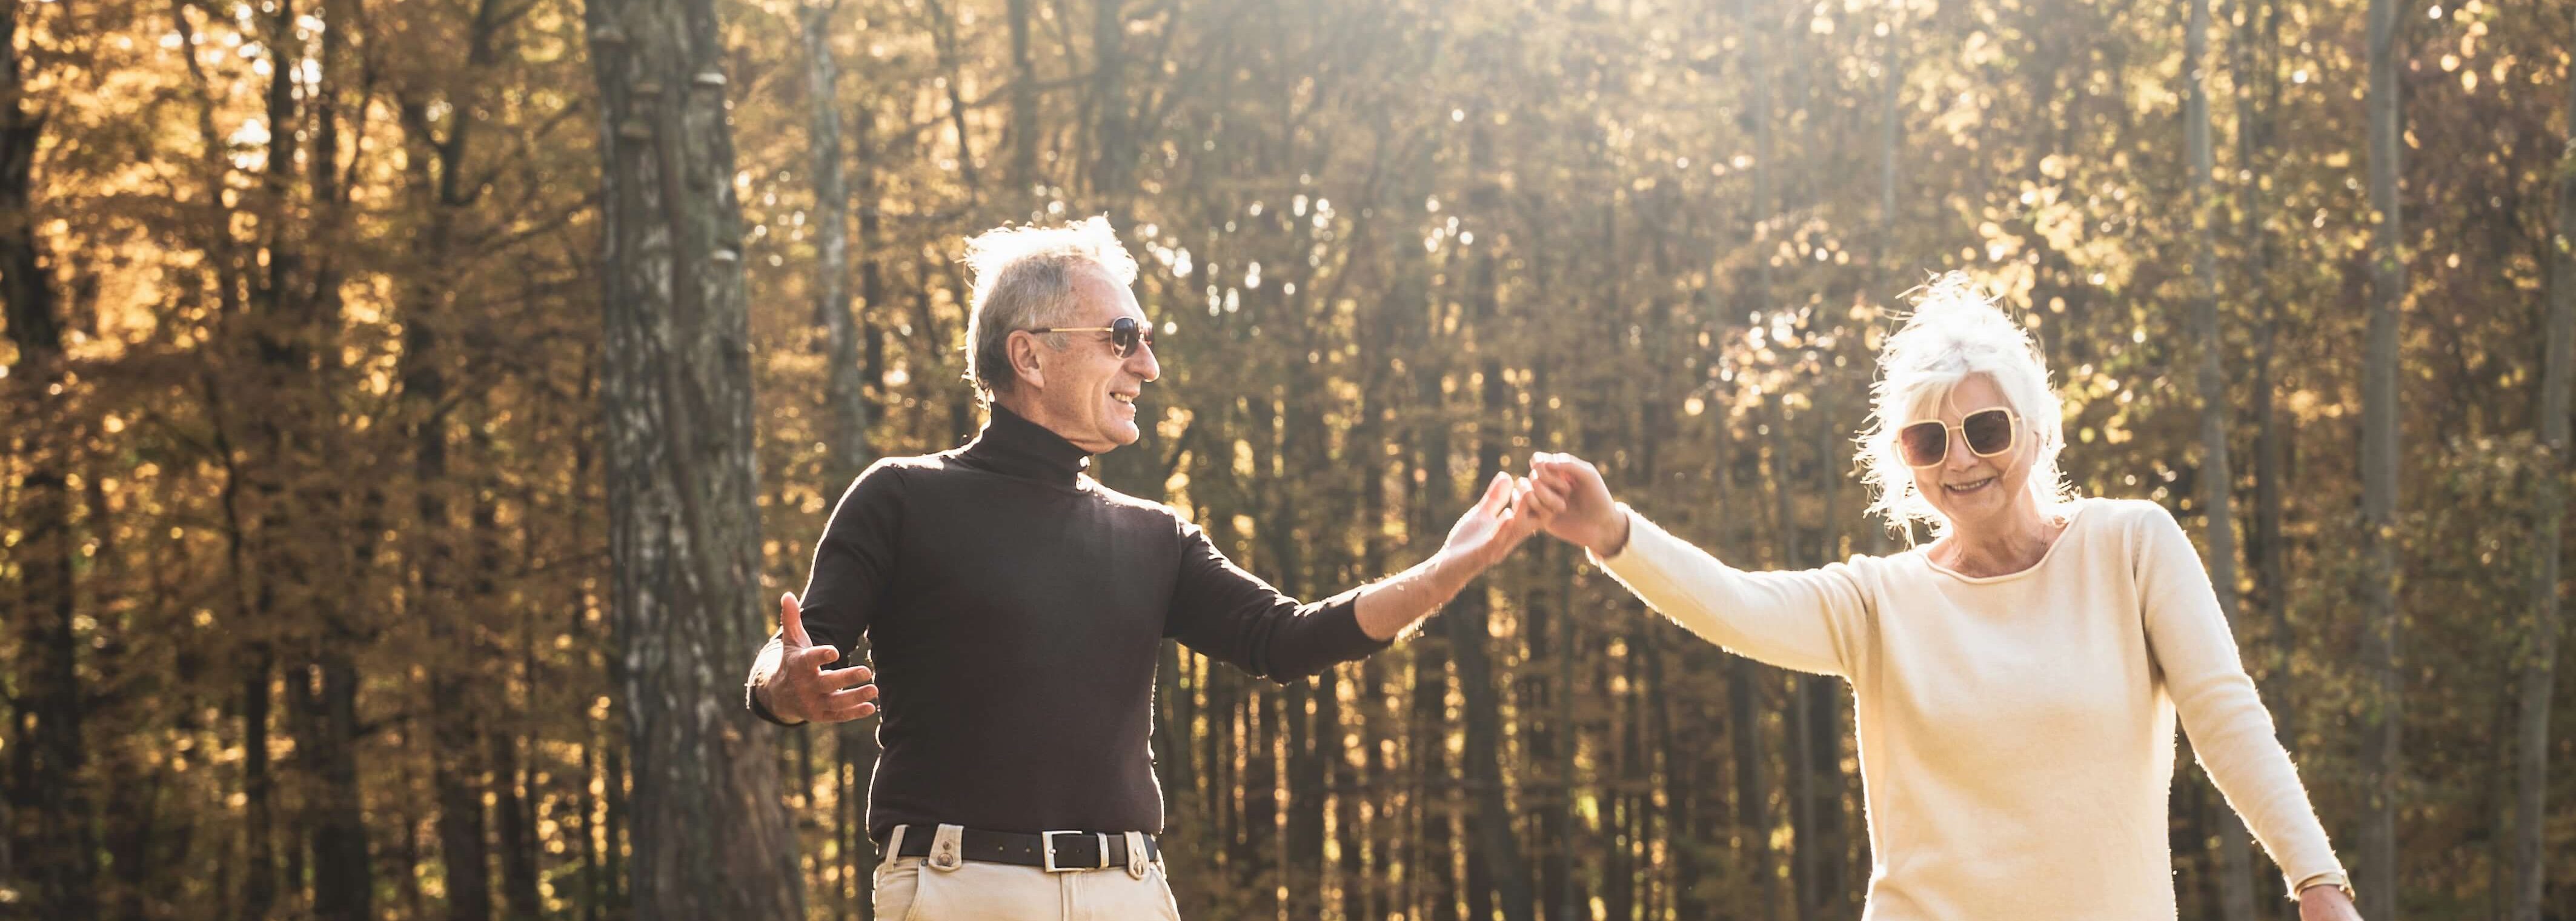 Romance and Intimacy: Are “Older” People Really all that Different?